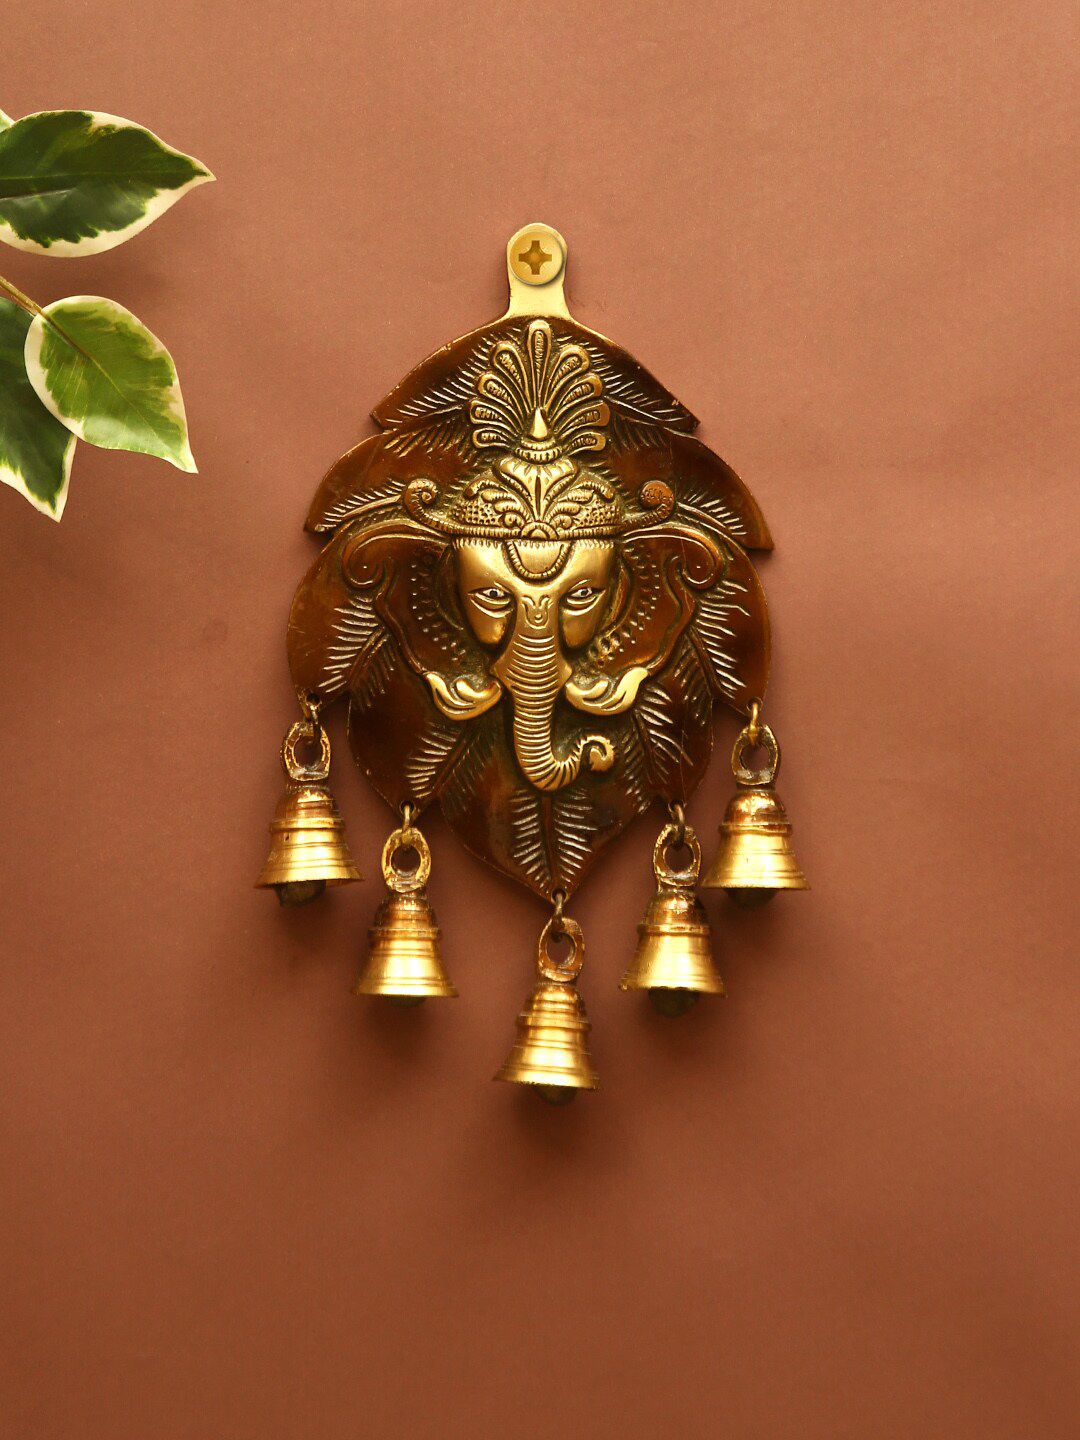 Aapno Rajasthan Brown & Gold-Toned Lord Ganesha Hanging Wall Decor Price in India